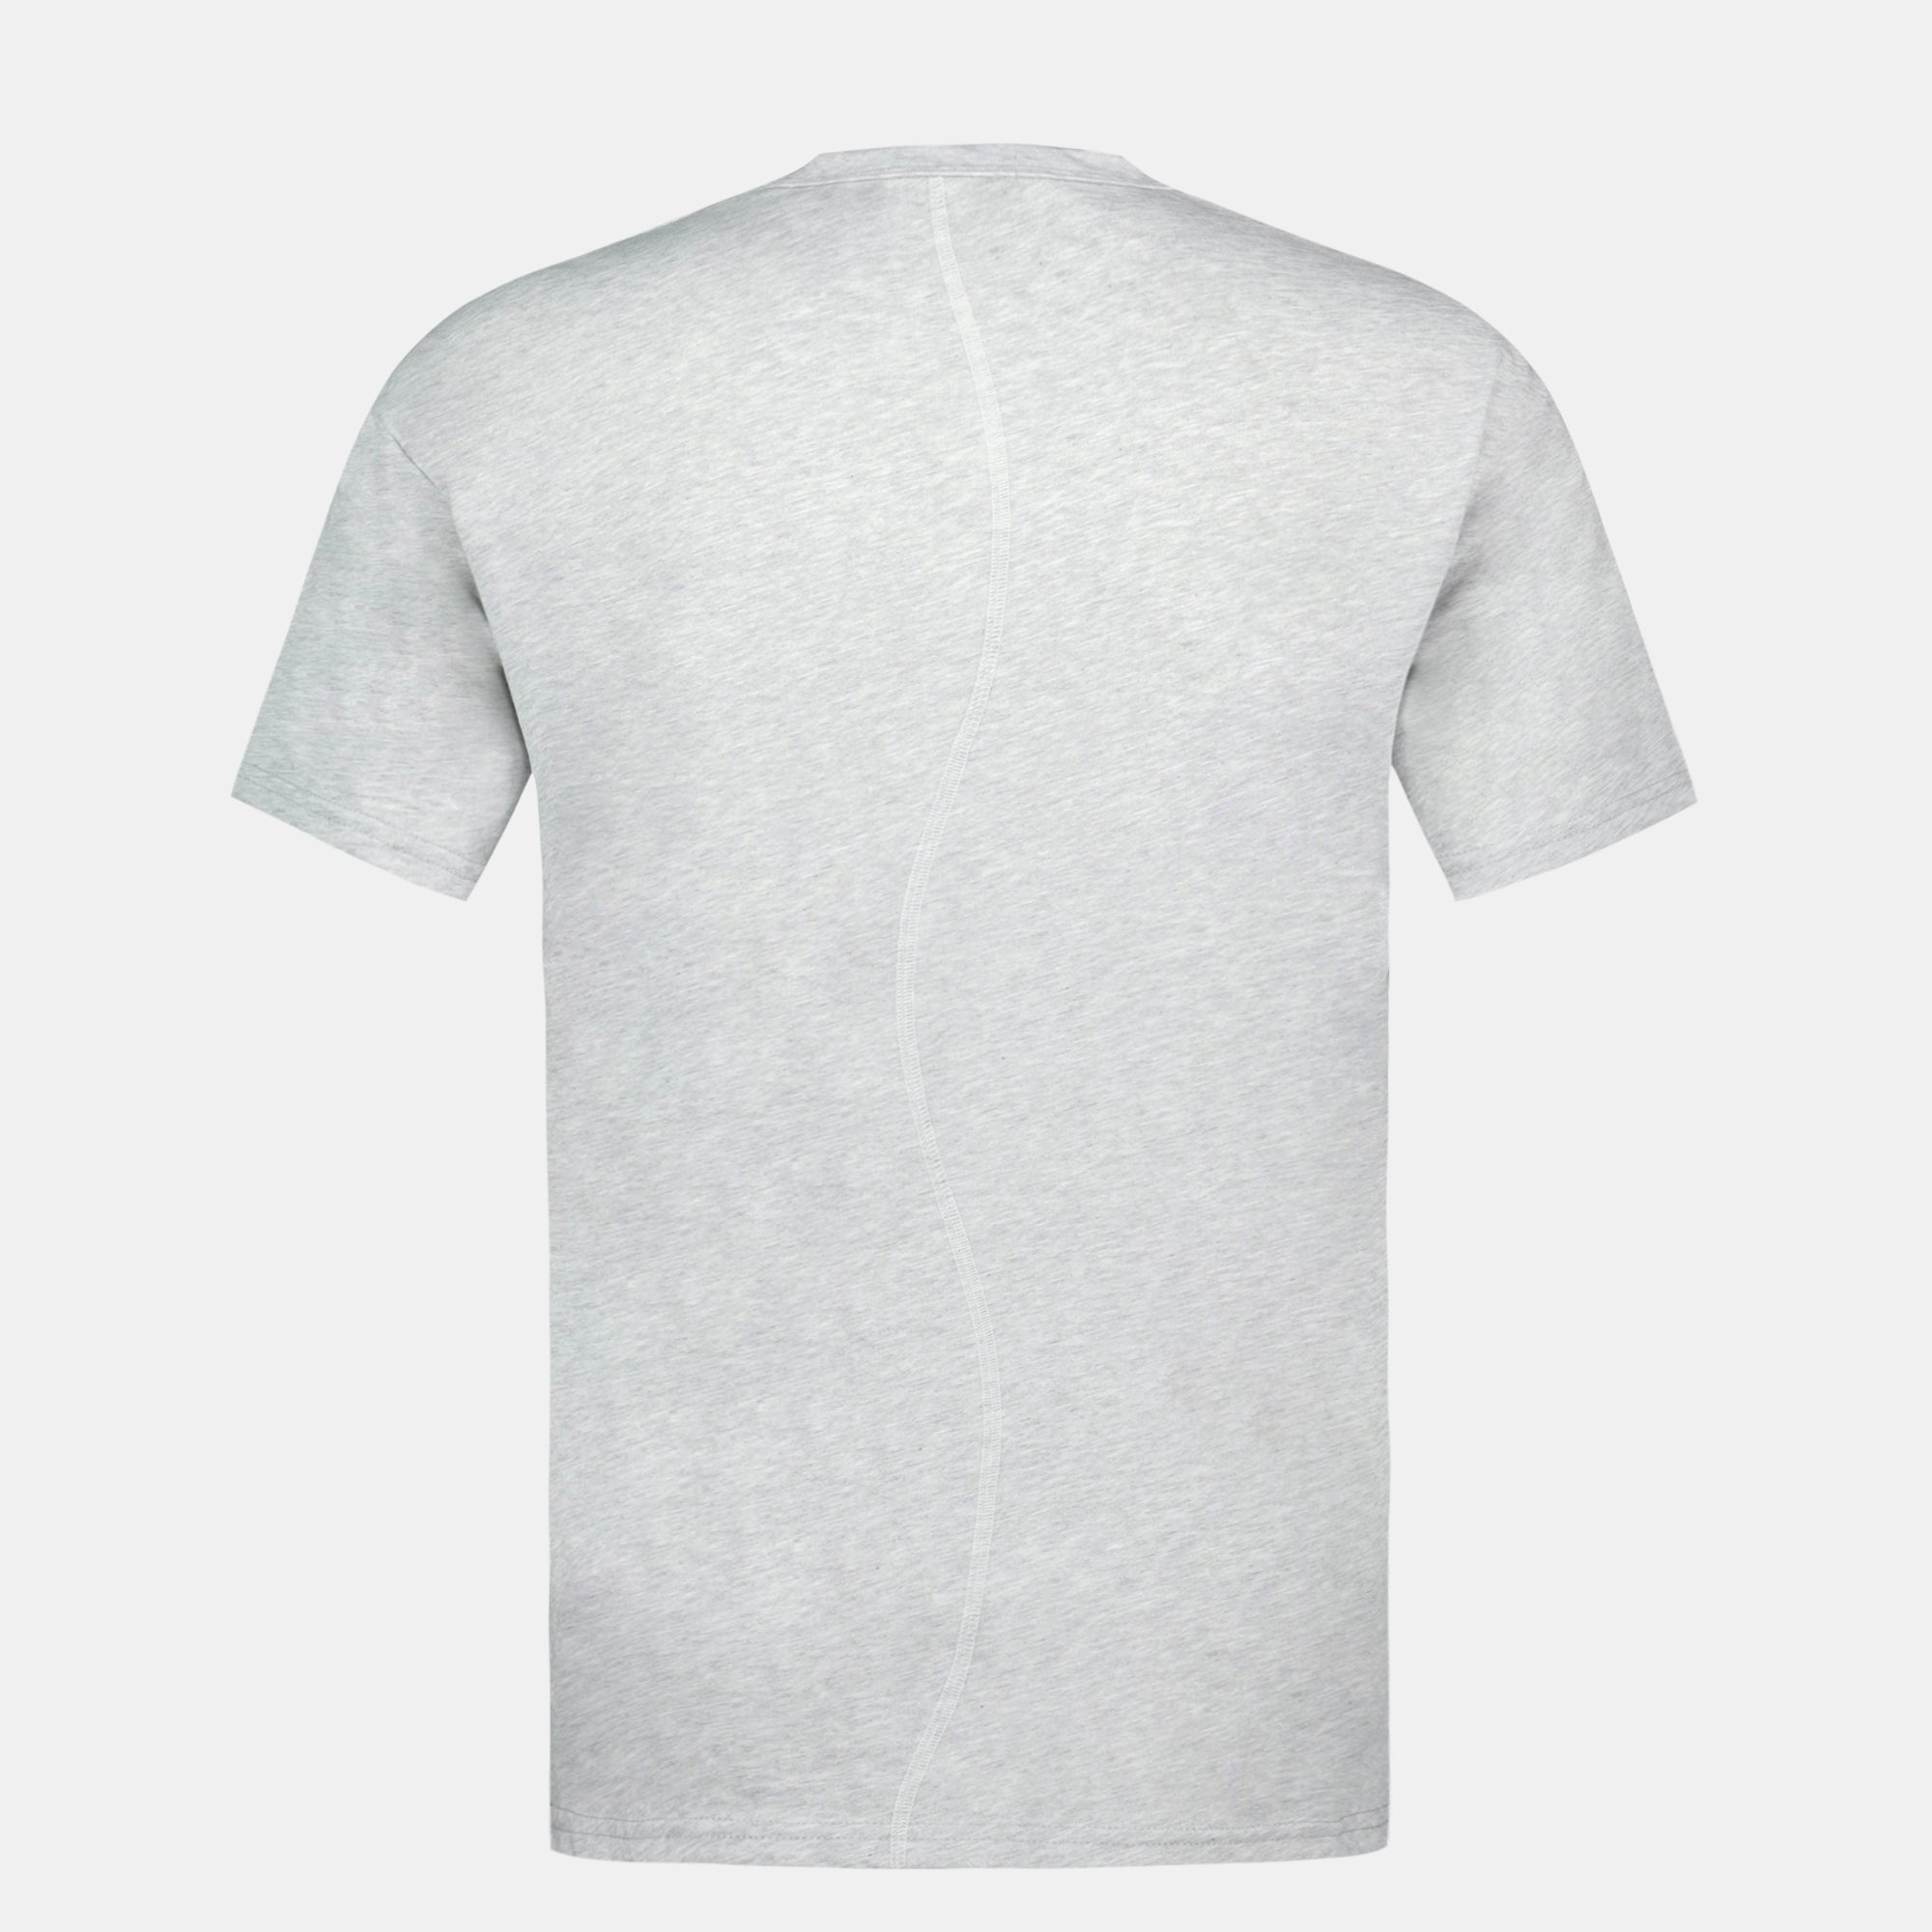 2410385-EFRO 24 Tee SS N°3 M gris chiné clair  | Maglietta Uomo